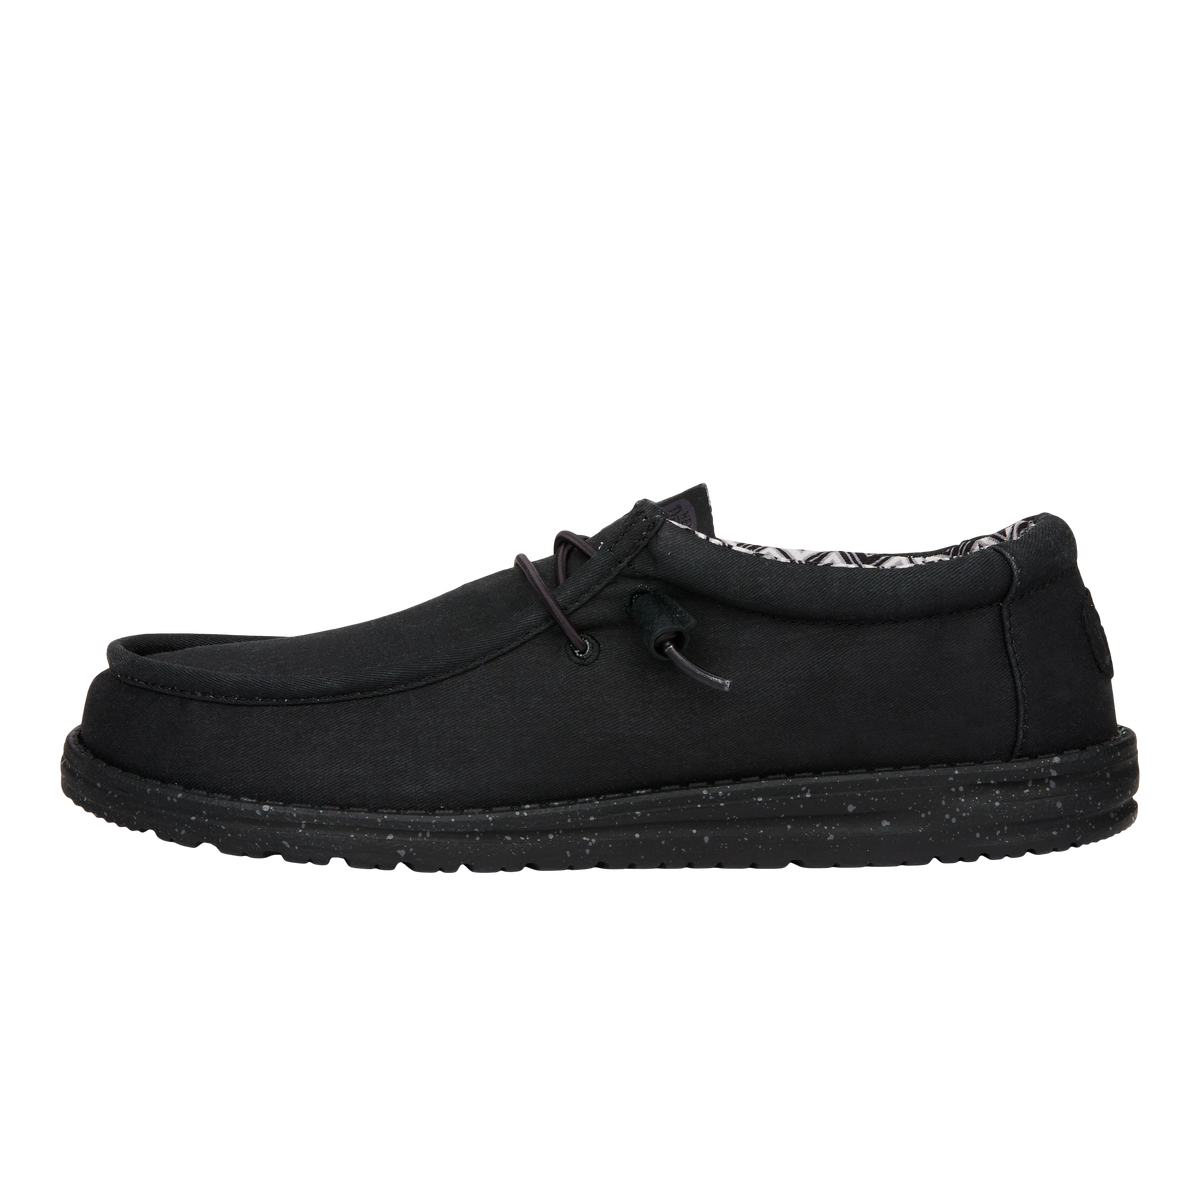 Wally Stretch Black - Men's Casual Shoes